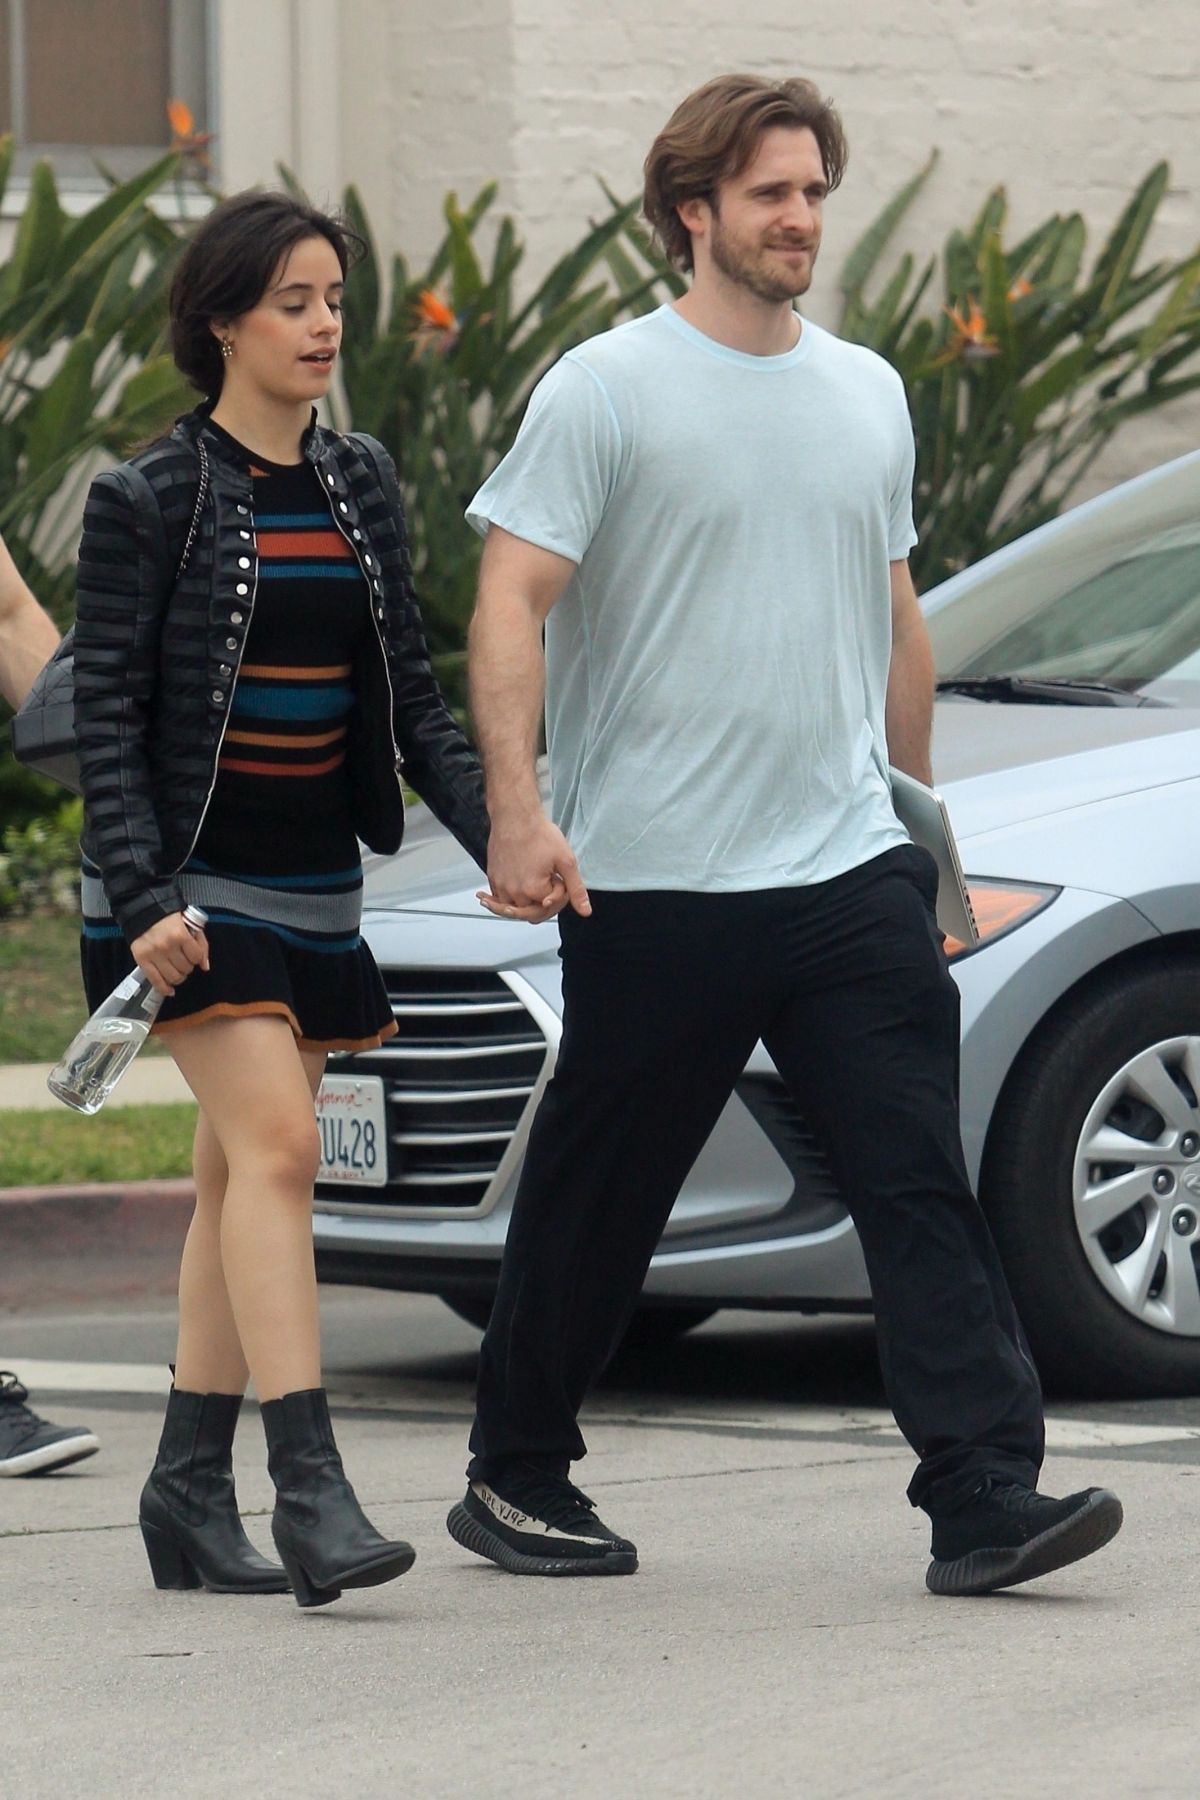 CAMILA CABELLO and Matthew Hussey Out in Hollywood 05/13/2019.